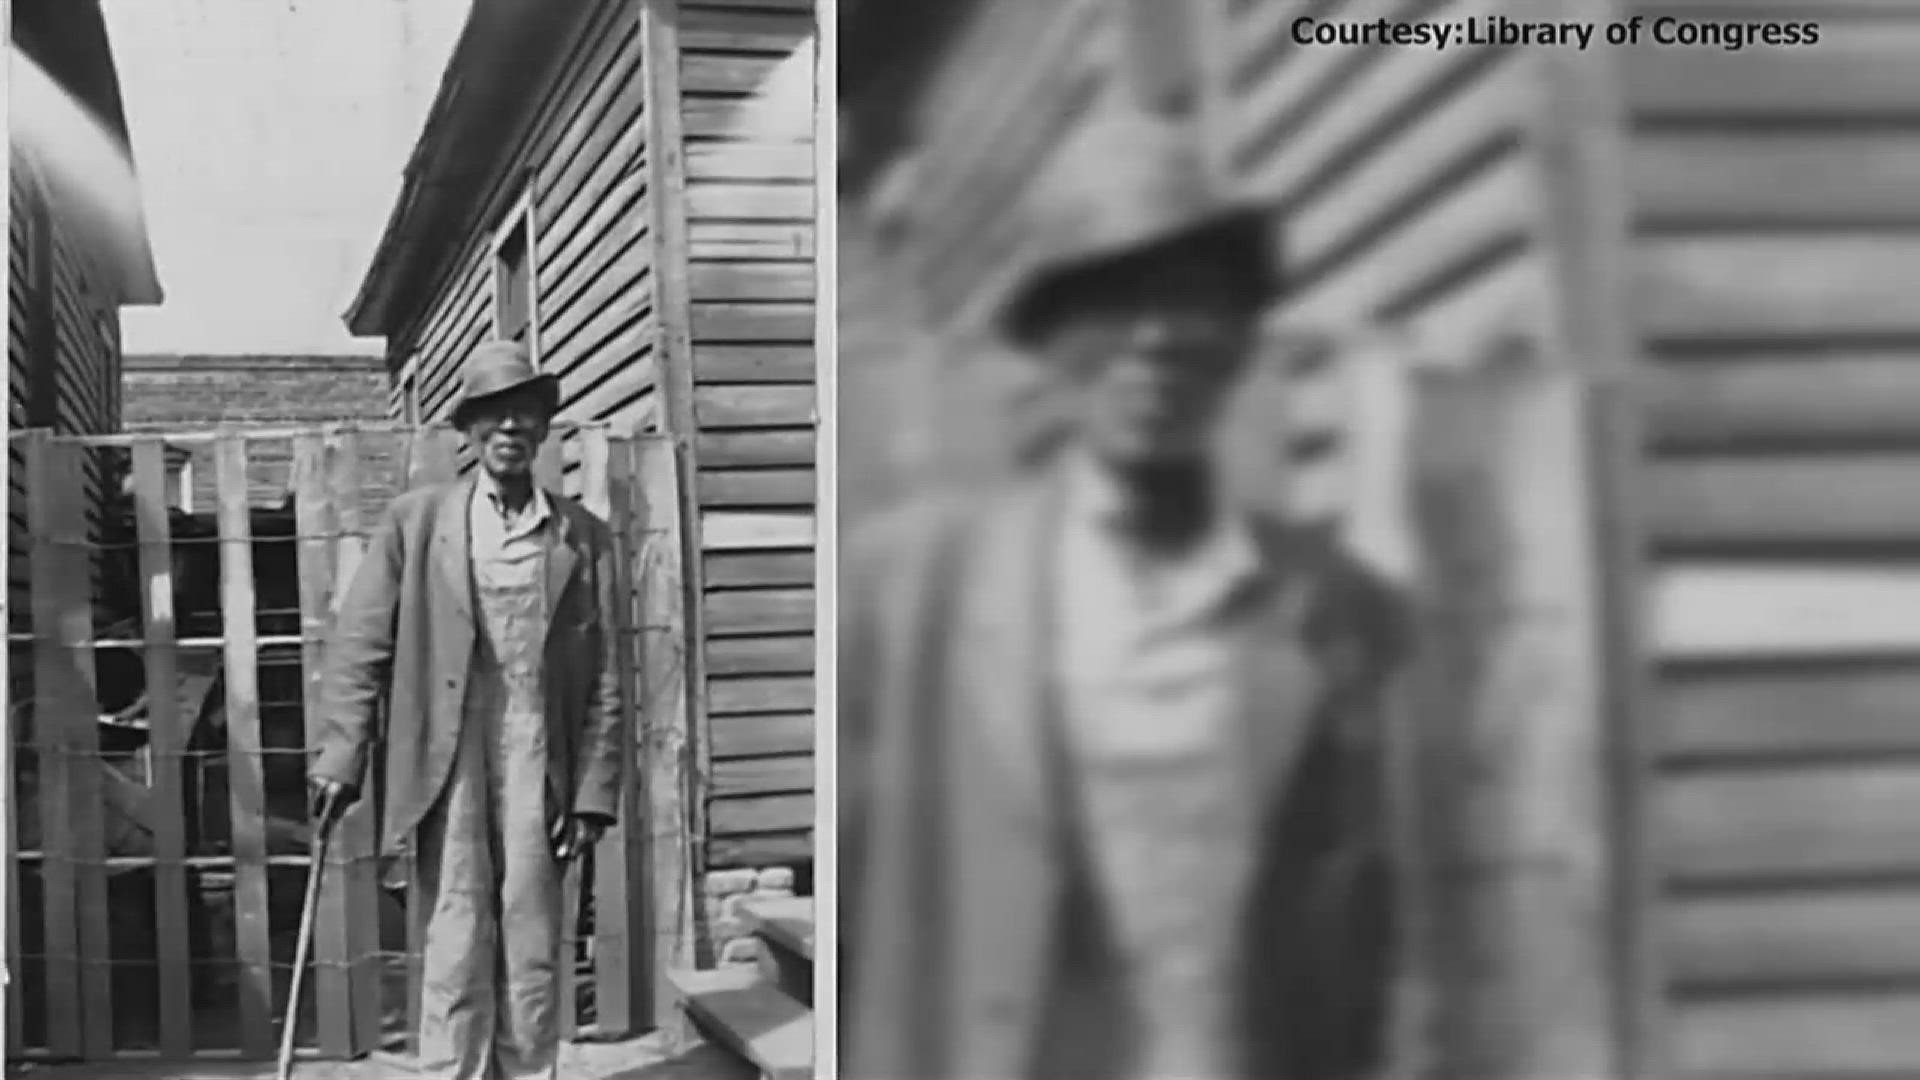 Leon takes you on the history of Juneteenth